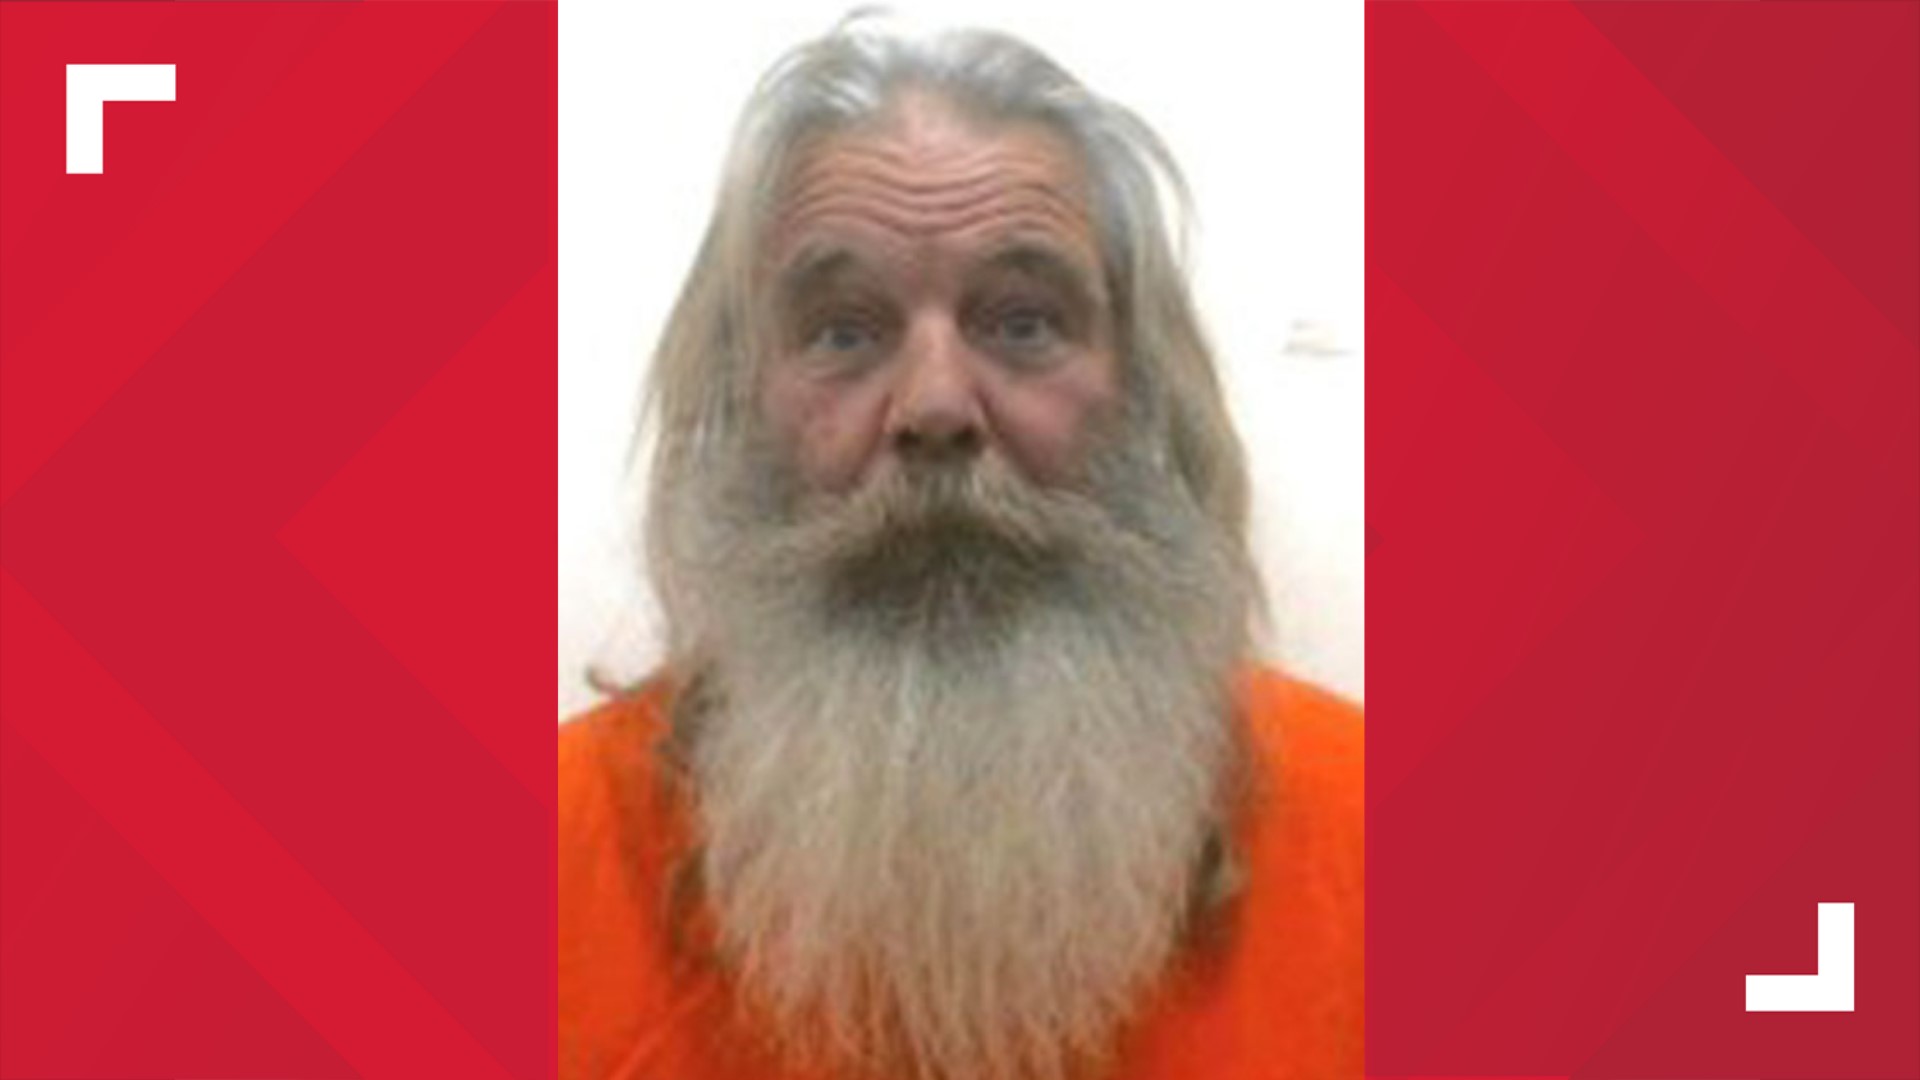 Wyndan Skye, 62, is charged with cruelty to companion animals and being held on a $40,000 bond.